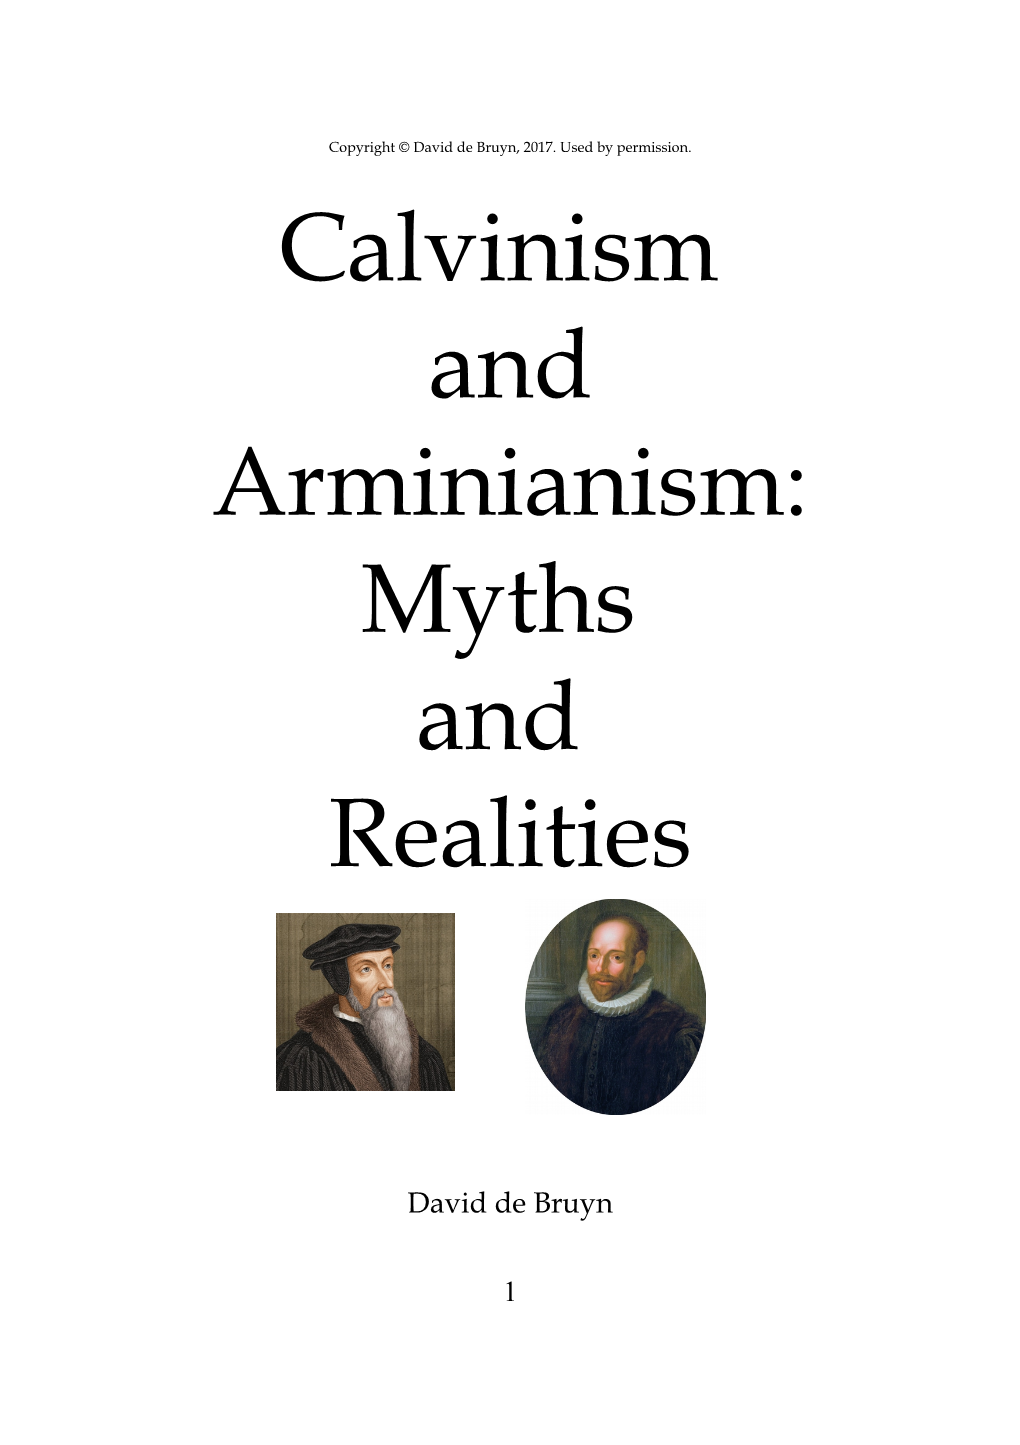 Calvinism and Arminianism: Myths and Realities